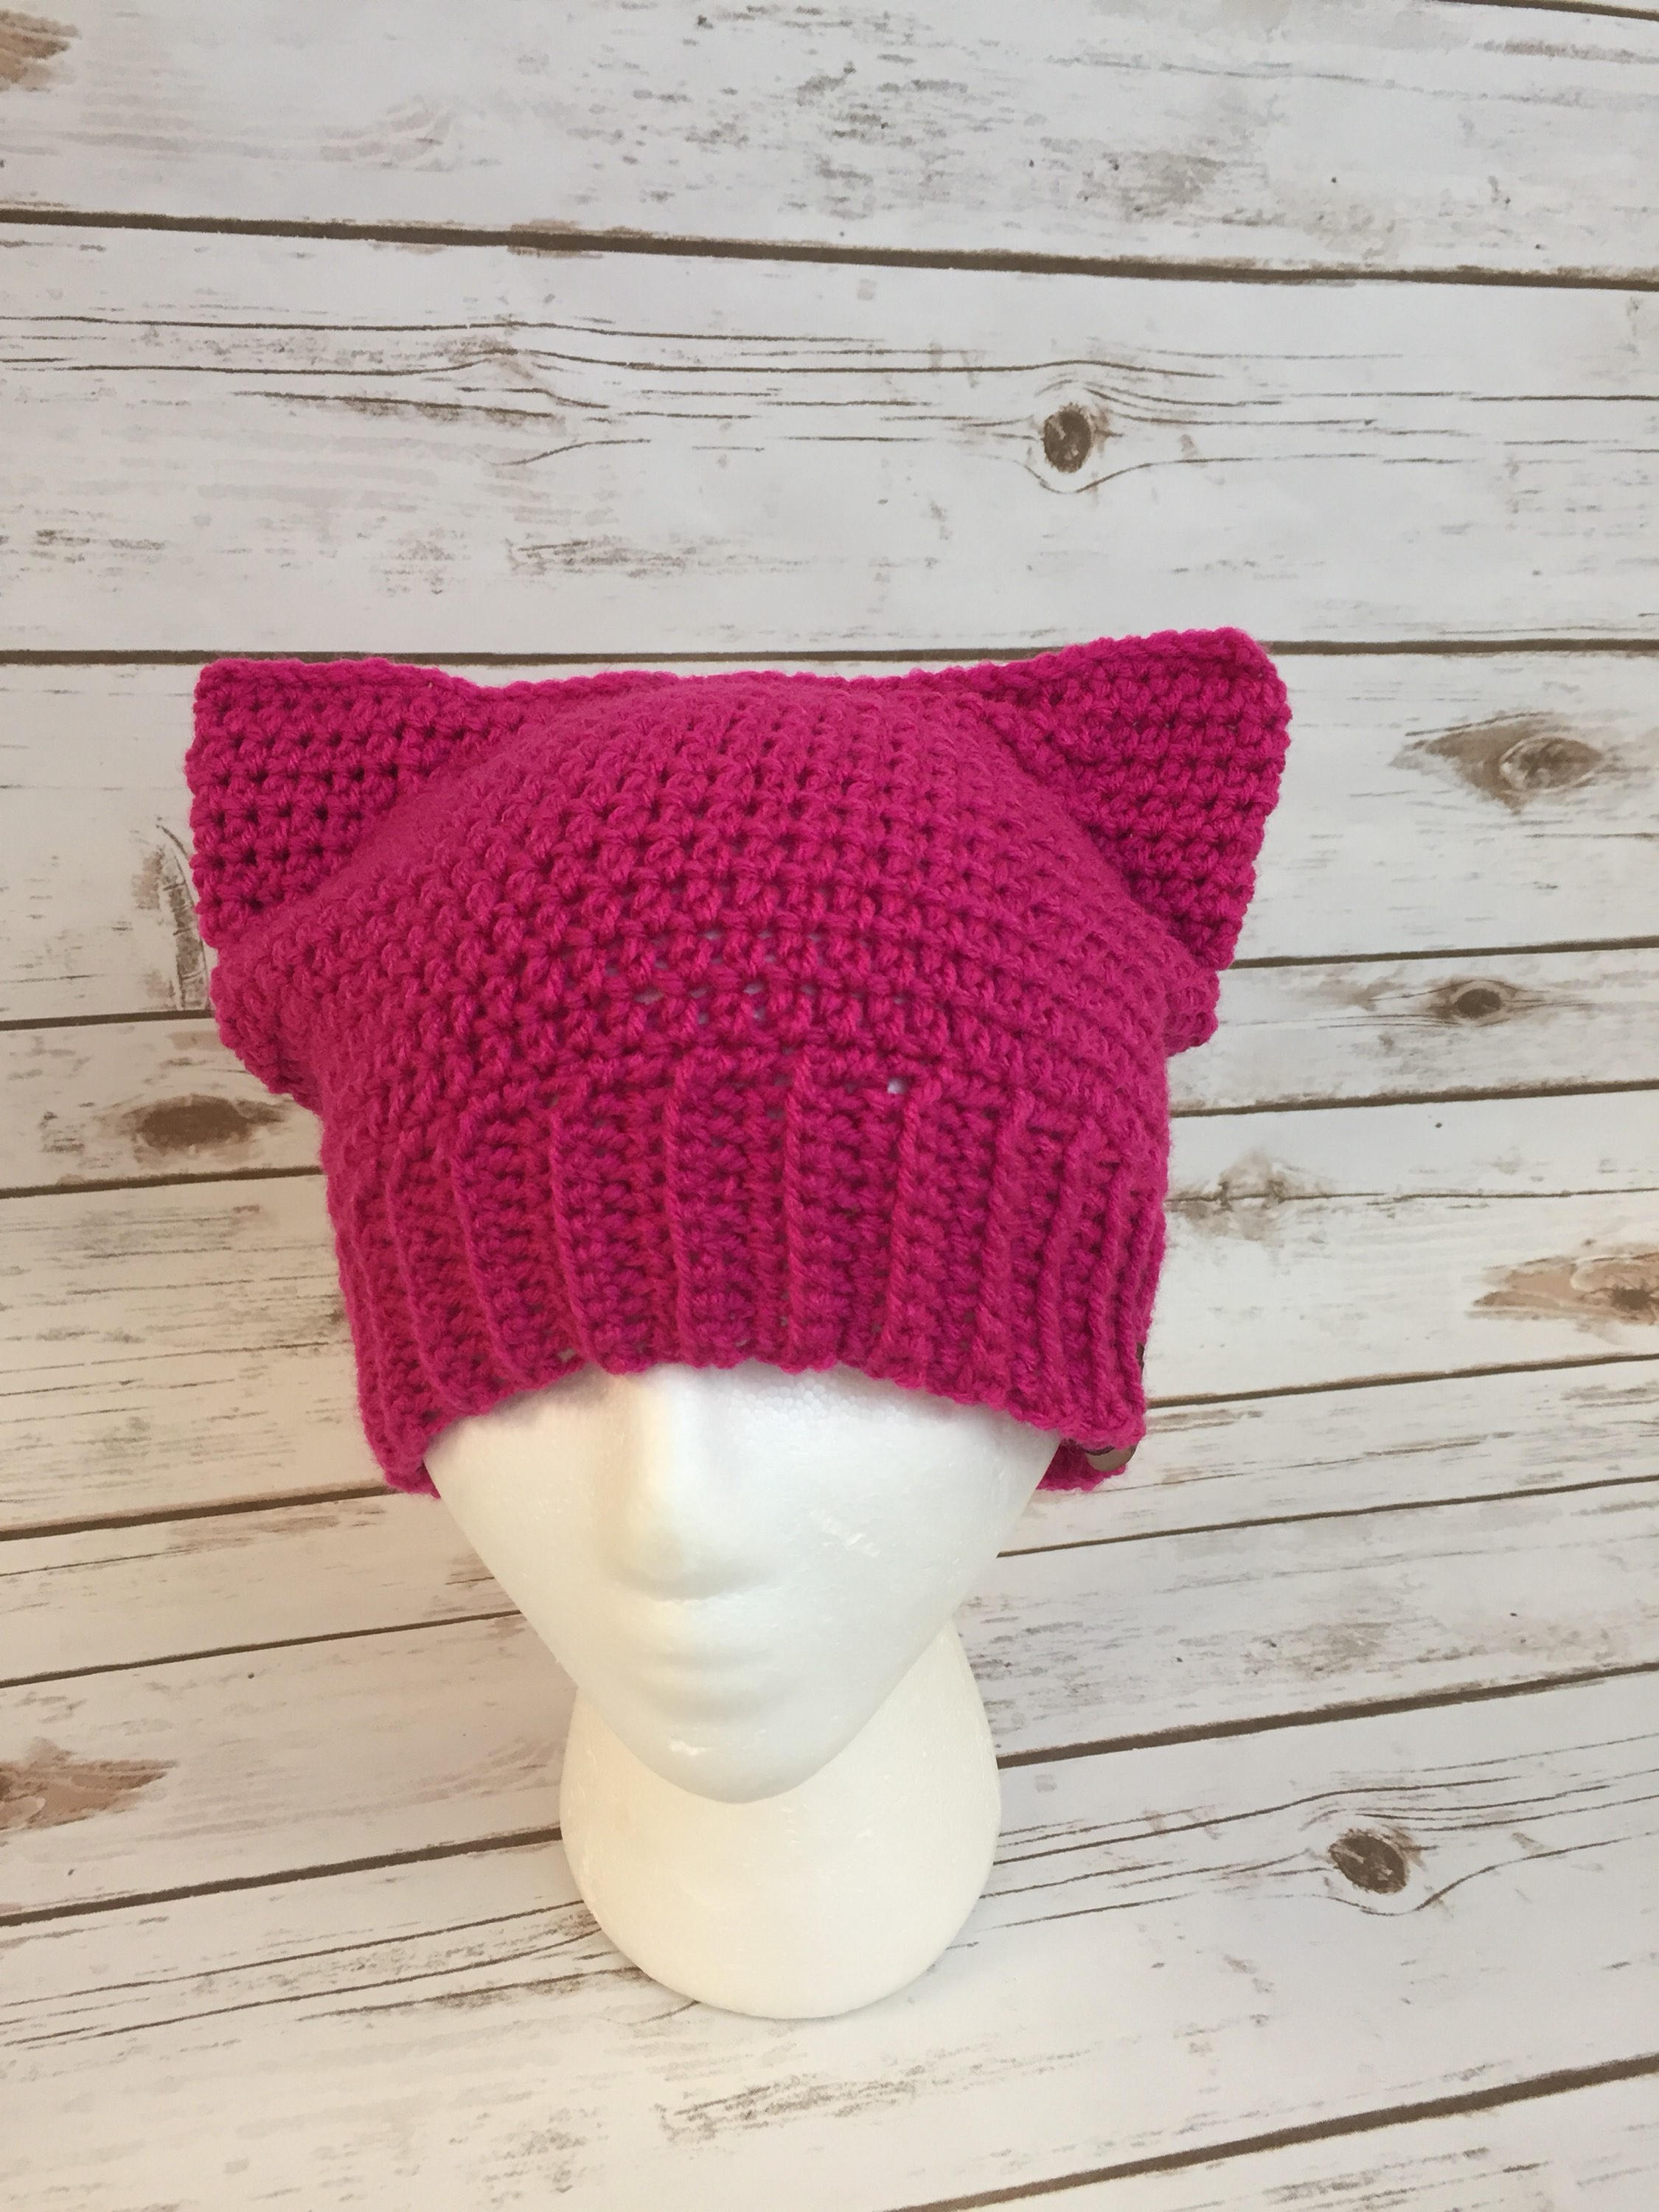 Pussy Cat Hats for Sale